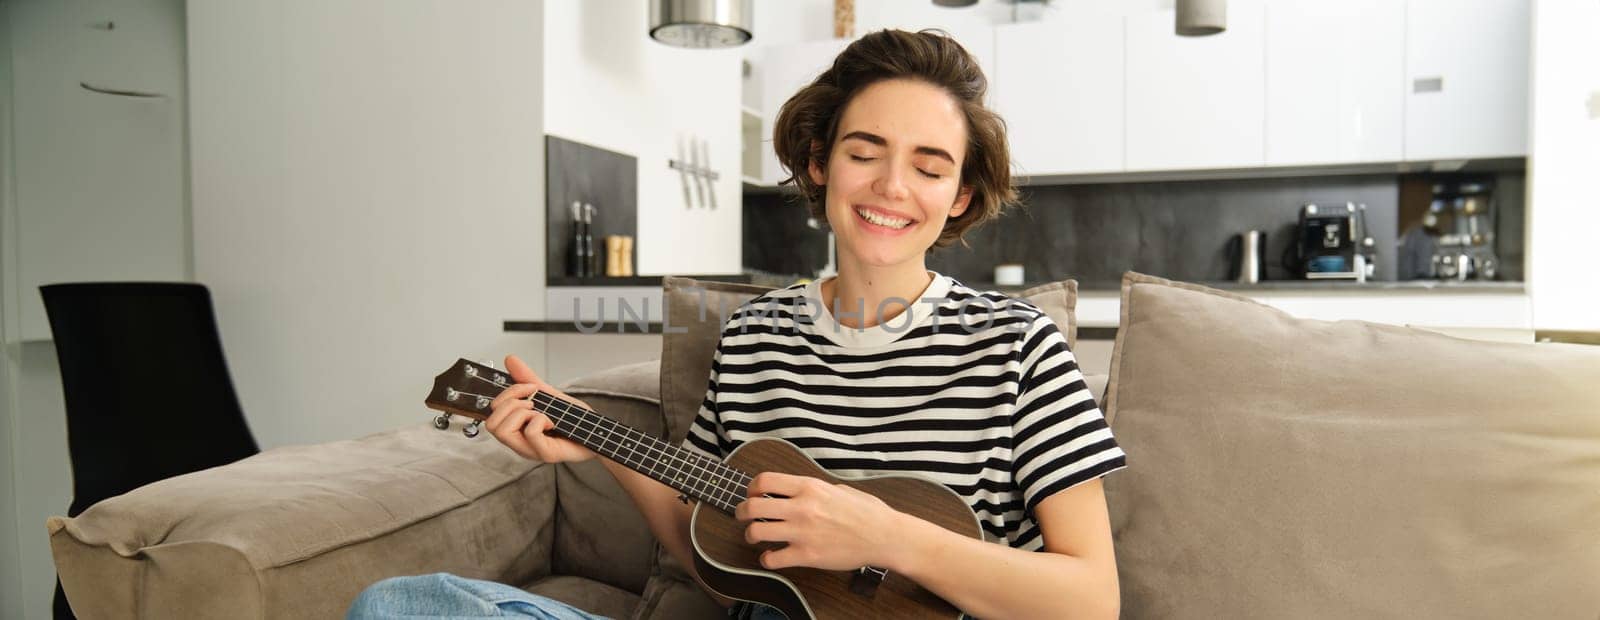 Young happy woman sitting on sofa and playing ukulele, singing and enjoying learning new musical instrument.